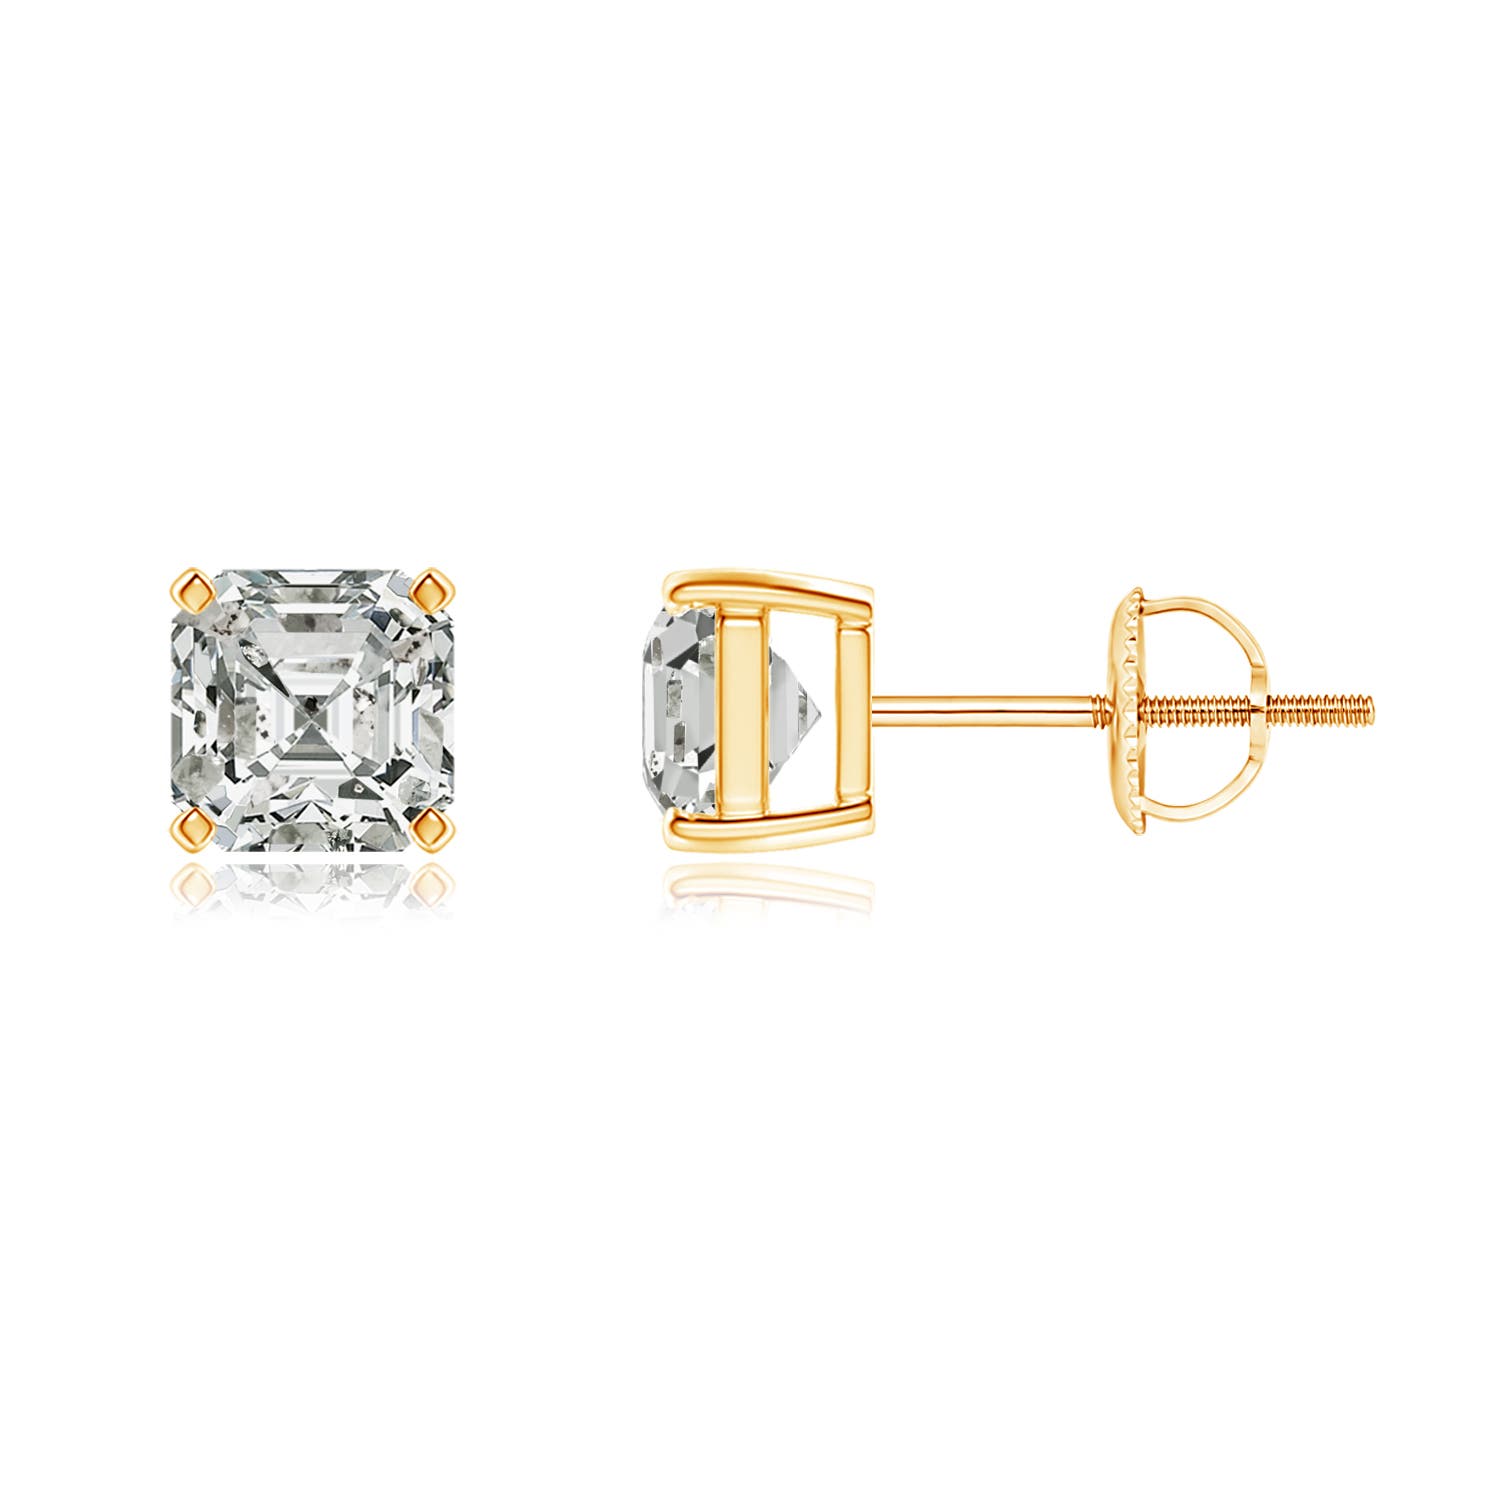 K, I3 / 1.6 CT / 14 KT Yellow Gold